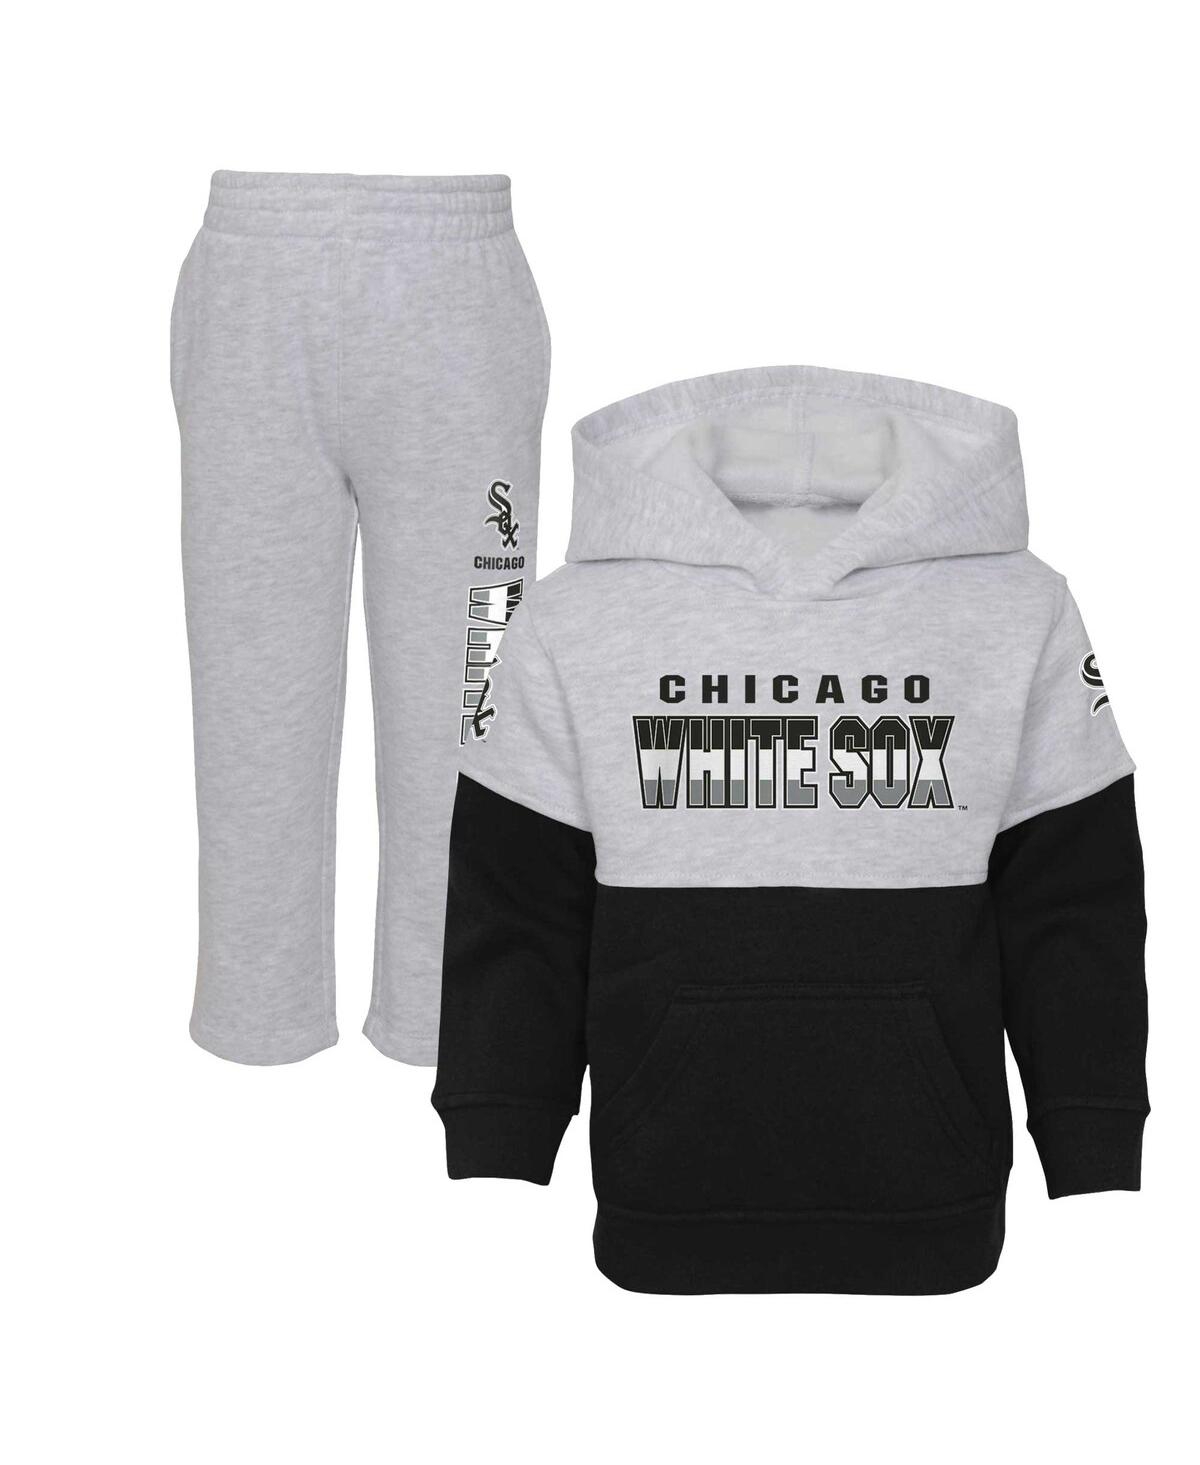 Outerstuff Babies' Toddler Boys And Girls Black, Heather Gray Chicago White Sox Two-piece Playmaker Set In Black,heather Gray